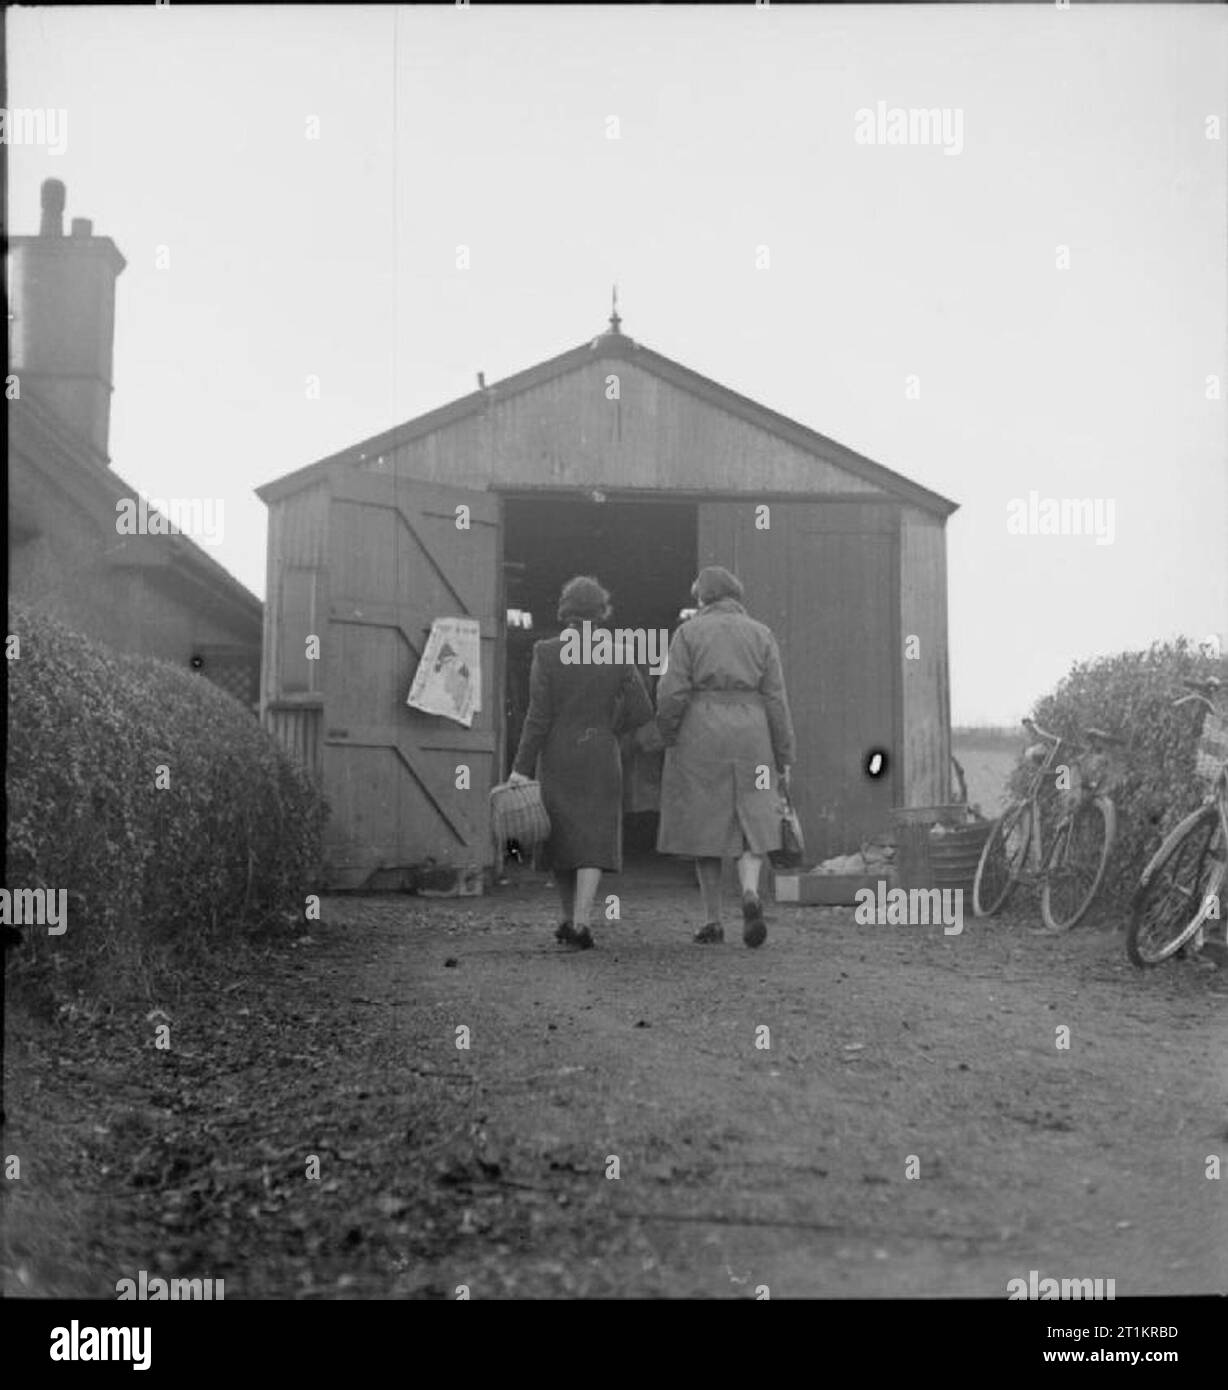 Sten Gun Production in Britain, 1943 Two part-time war workers enter their 'factory at the beginning of their shift. The building is an old hen house which is being reused as a venue for the manufacture of breech blocks from solid steel bars. This 'factory' was owned by Mr C W (Charles) Packard, an engineer and former haulage contractor, and was probably in Welwyn Garden City. Stock Photo